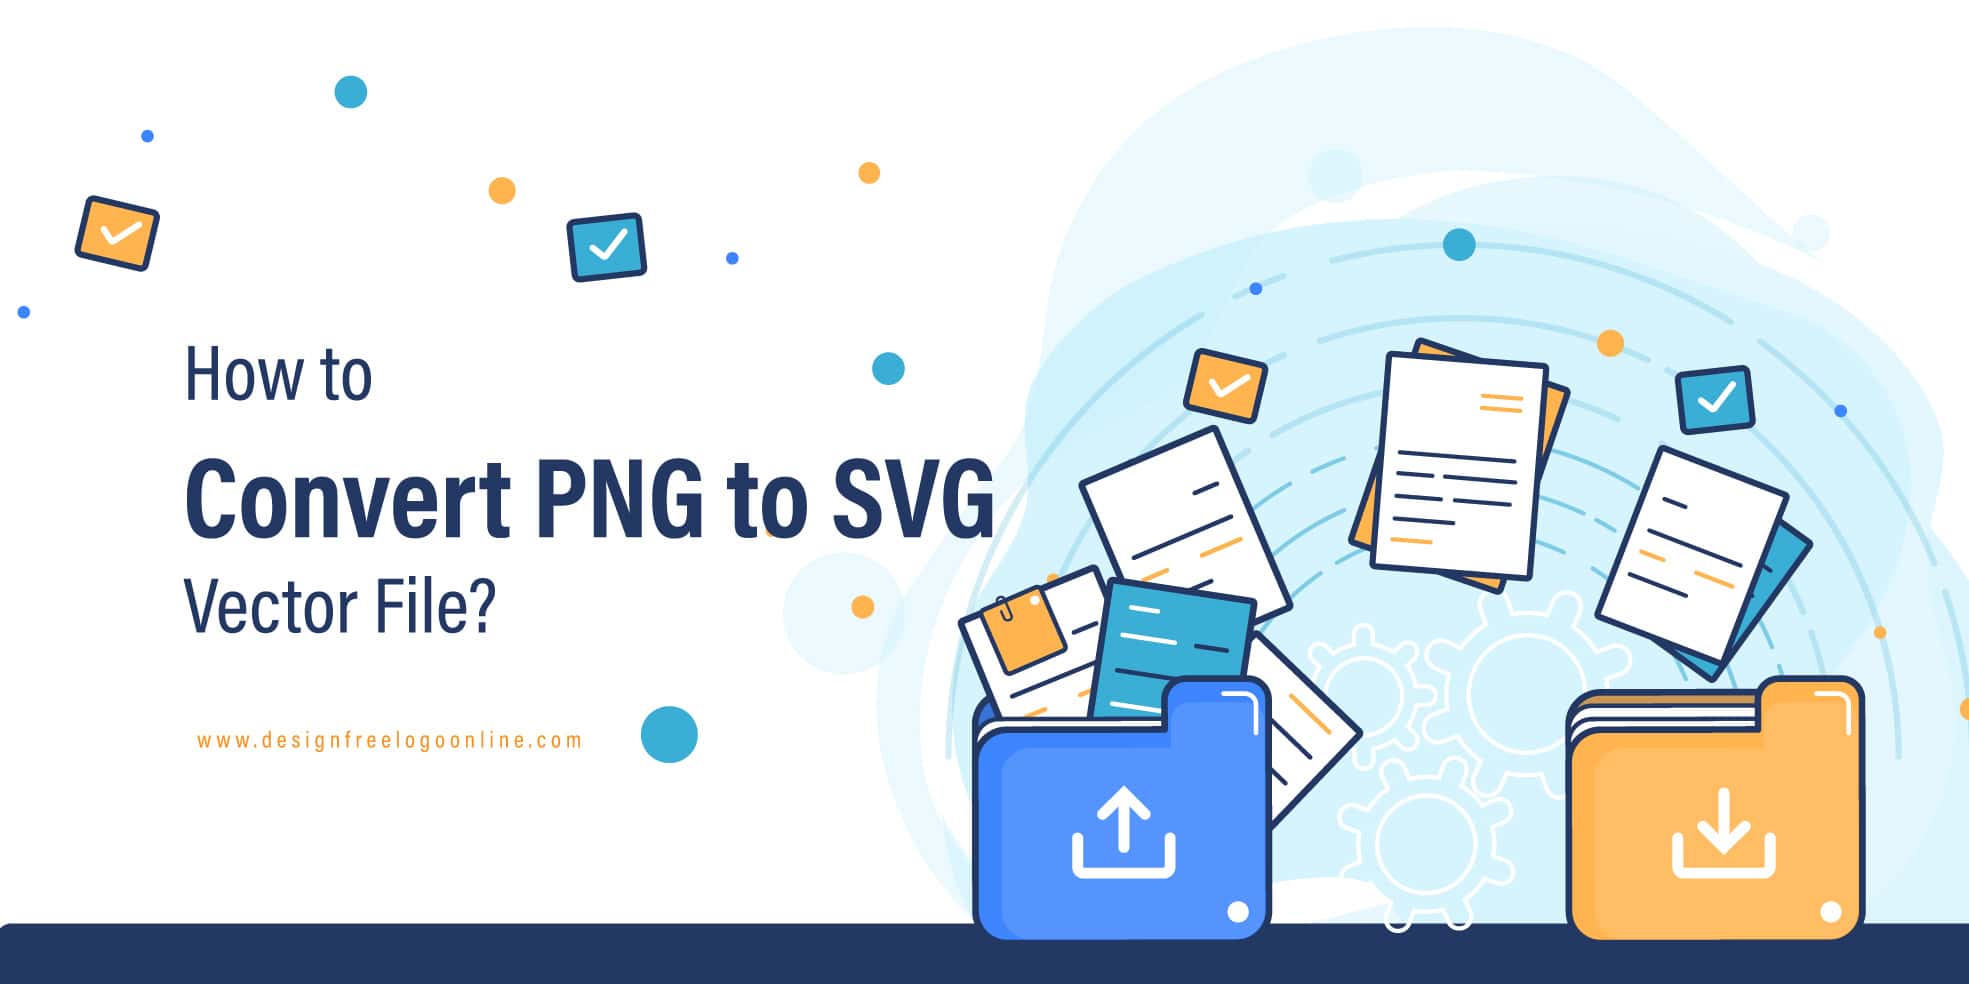 How to Convert PNG to SVG Vector File